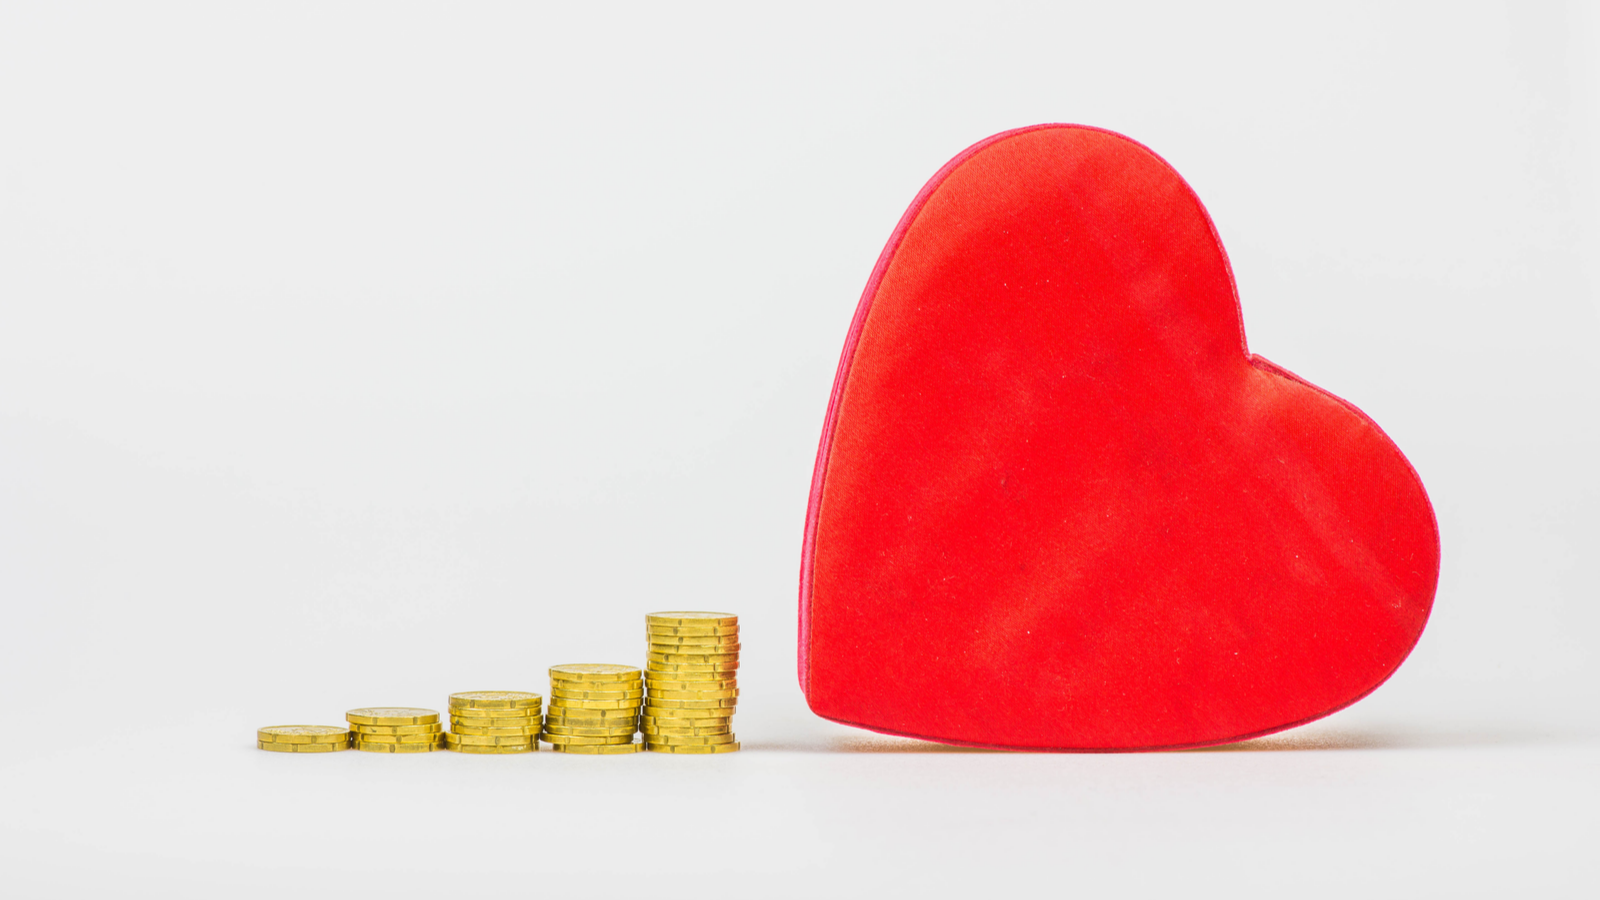 Stacks of gold coins increasing in amount lead up to a big red heart